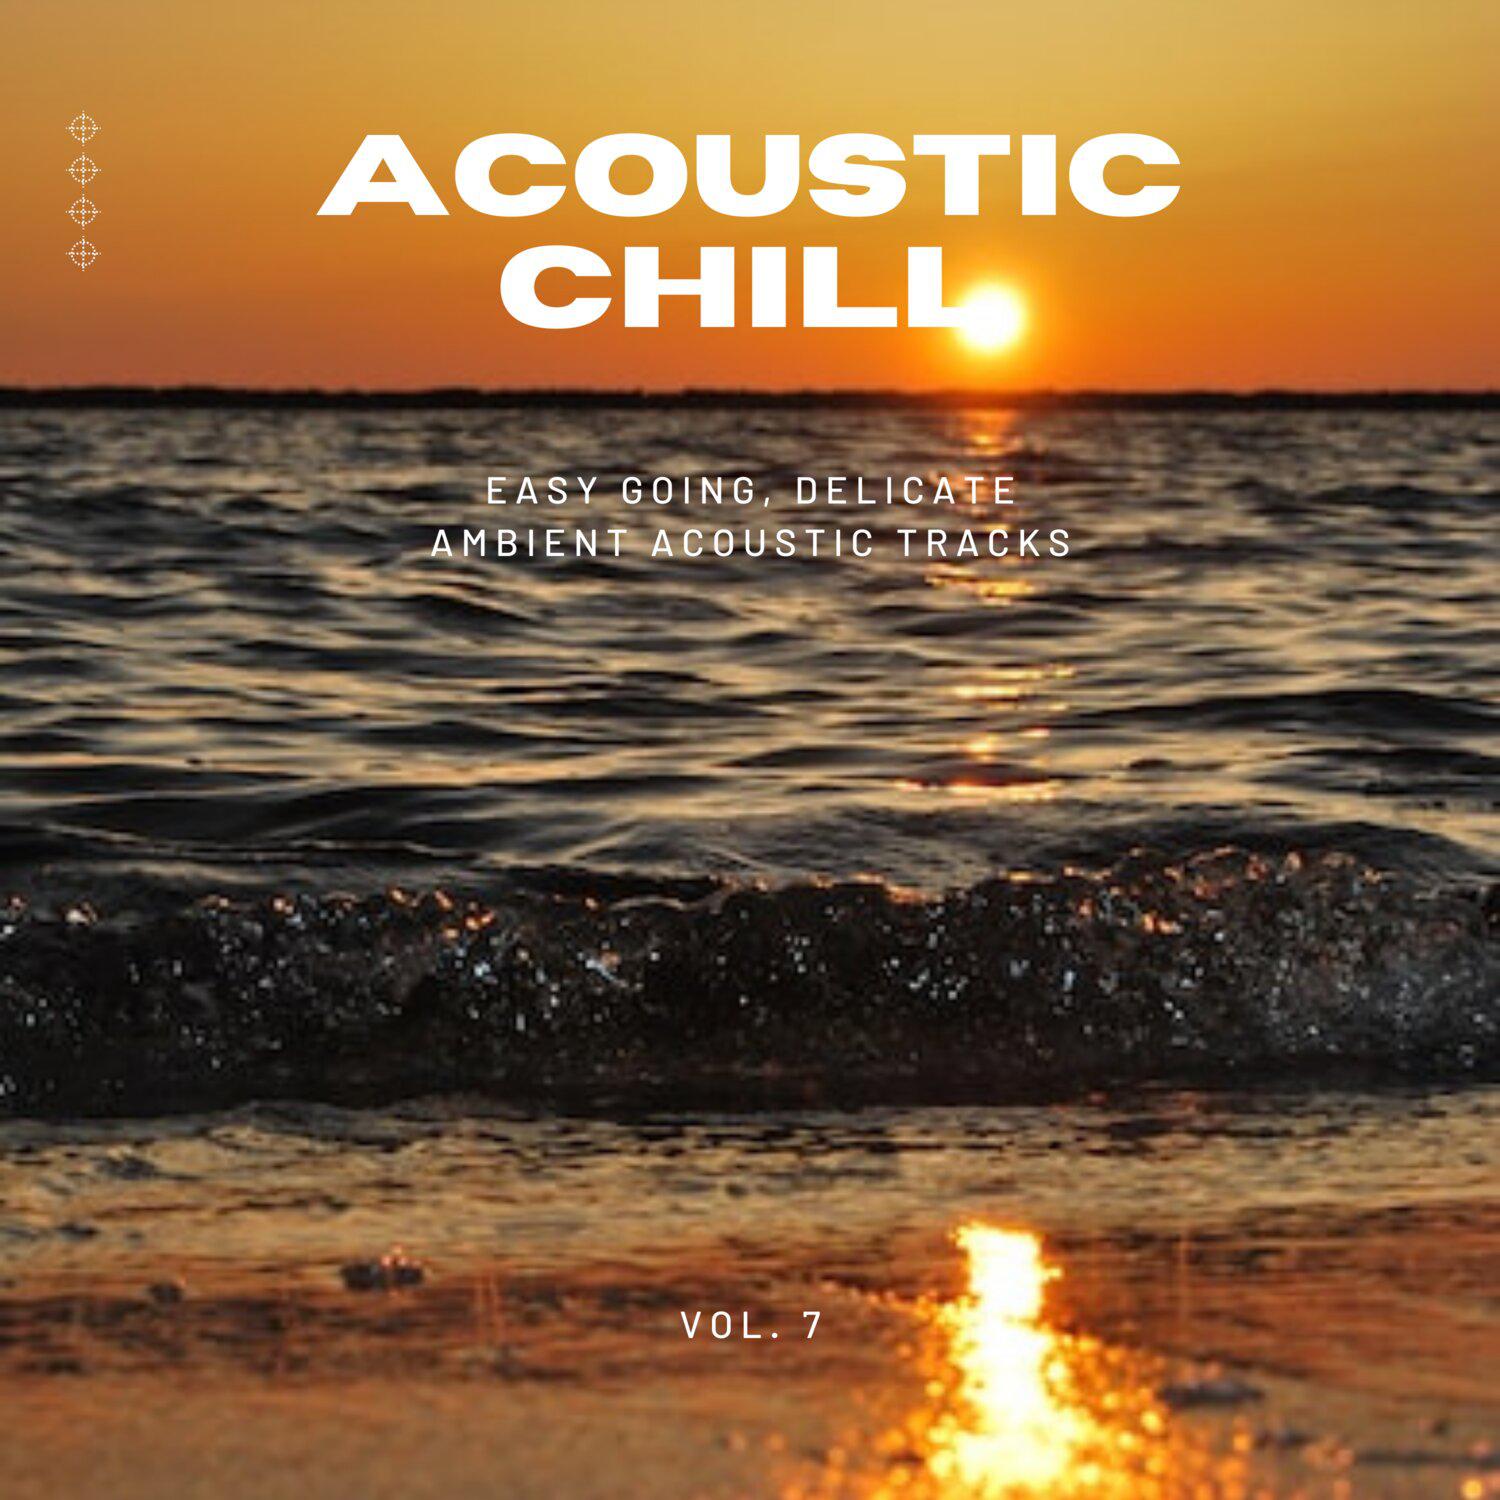 Постер альбома Acoustic Chill: Easy Going, Delicate Ambient Acoustic Tracks, Vol. 07